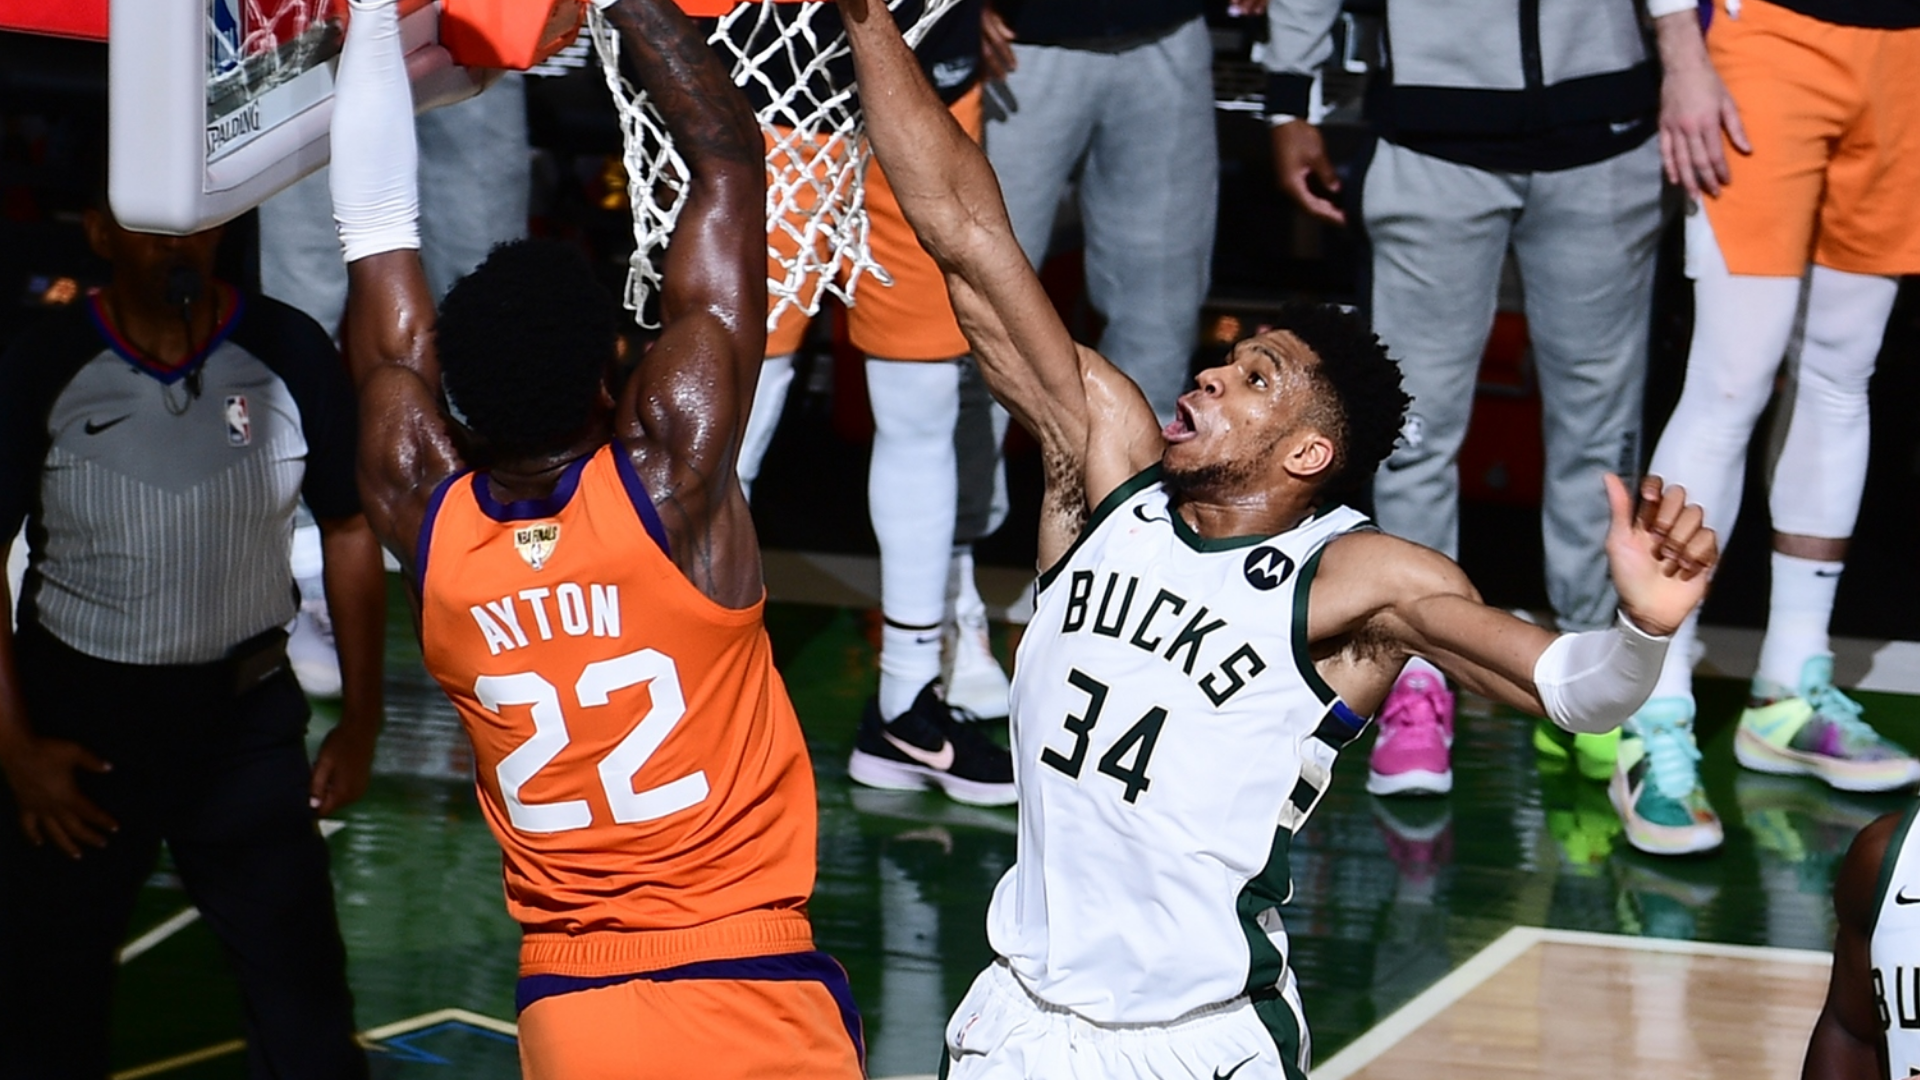 NBA Finals 2021: Giannis Antetokounmpo delivers signature Finals moment with clutch block in Game 4. NBA.com Australia. The official site of